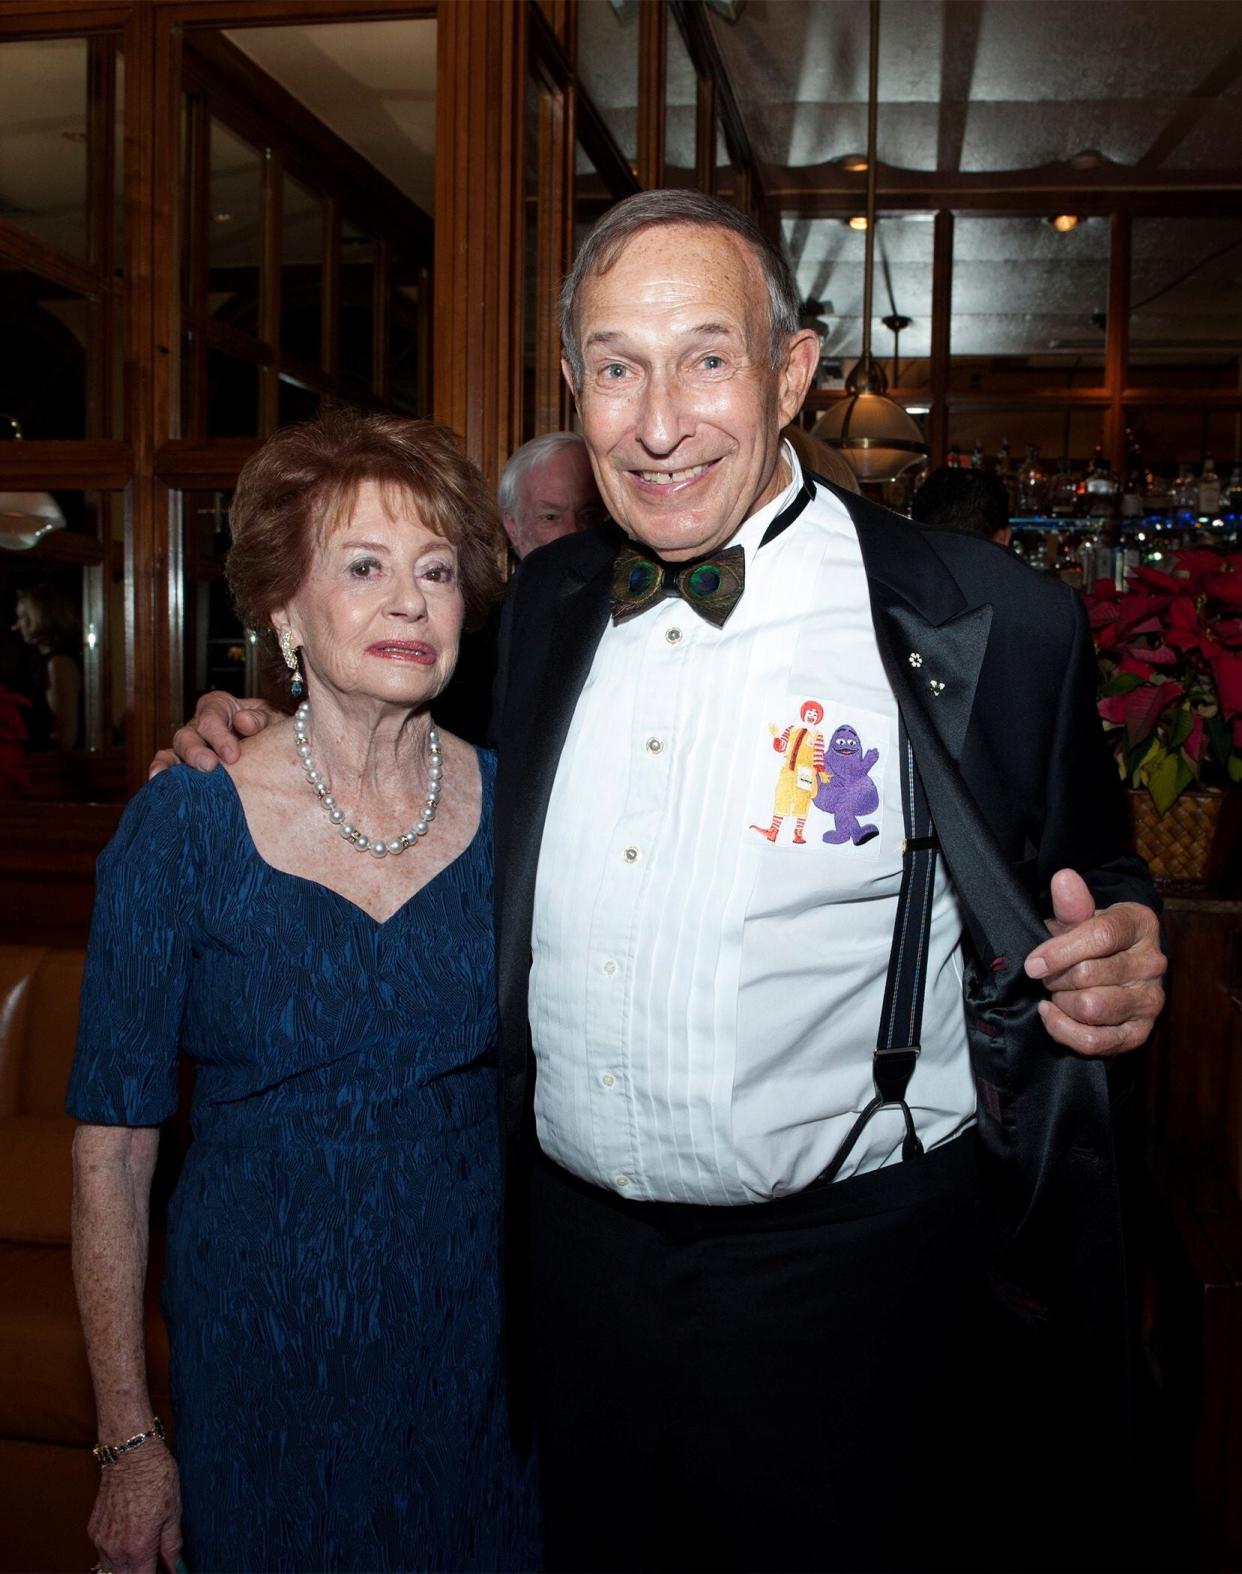 Susan and George Cohon at a fundraiser for the Ann Norton Sculpture Gardens at Cafe L'Europe on Dec. 14, 2018, in Palm Beach.